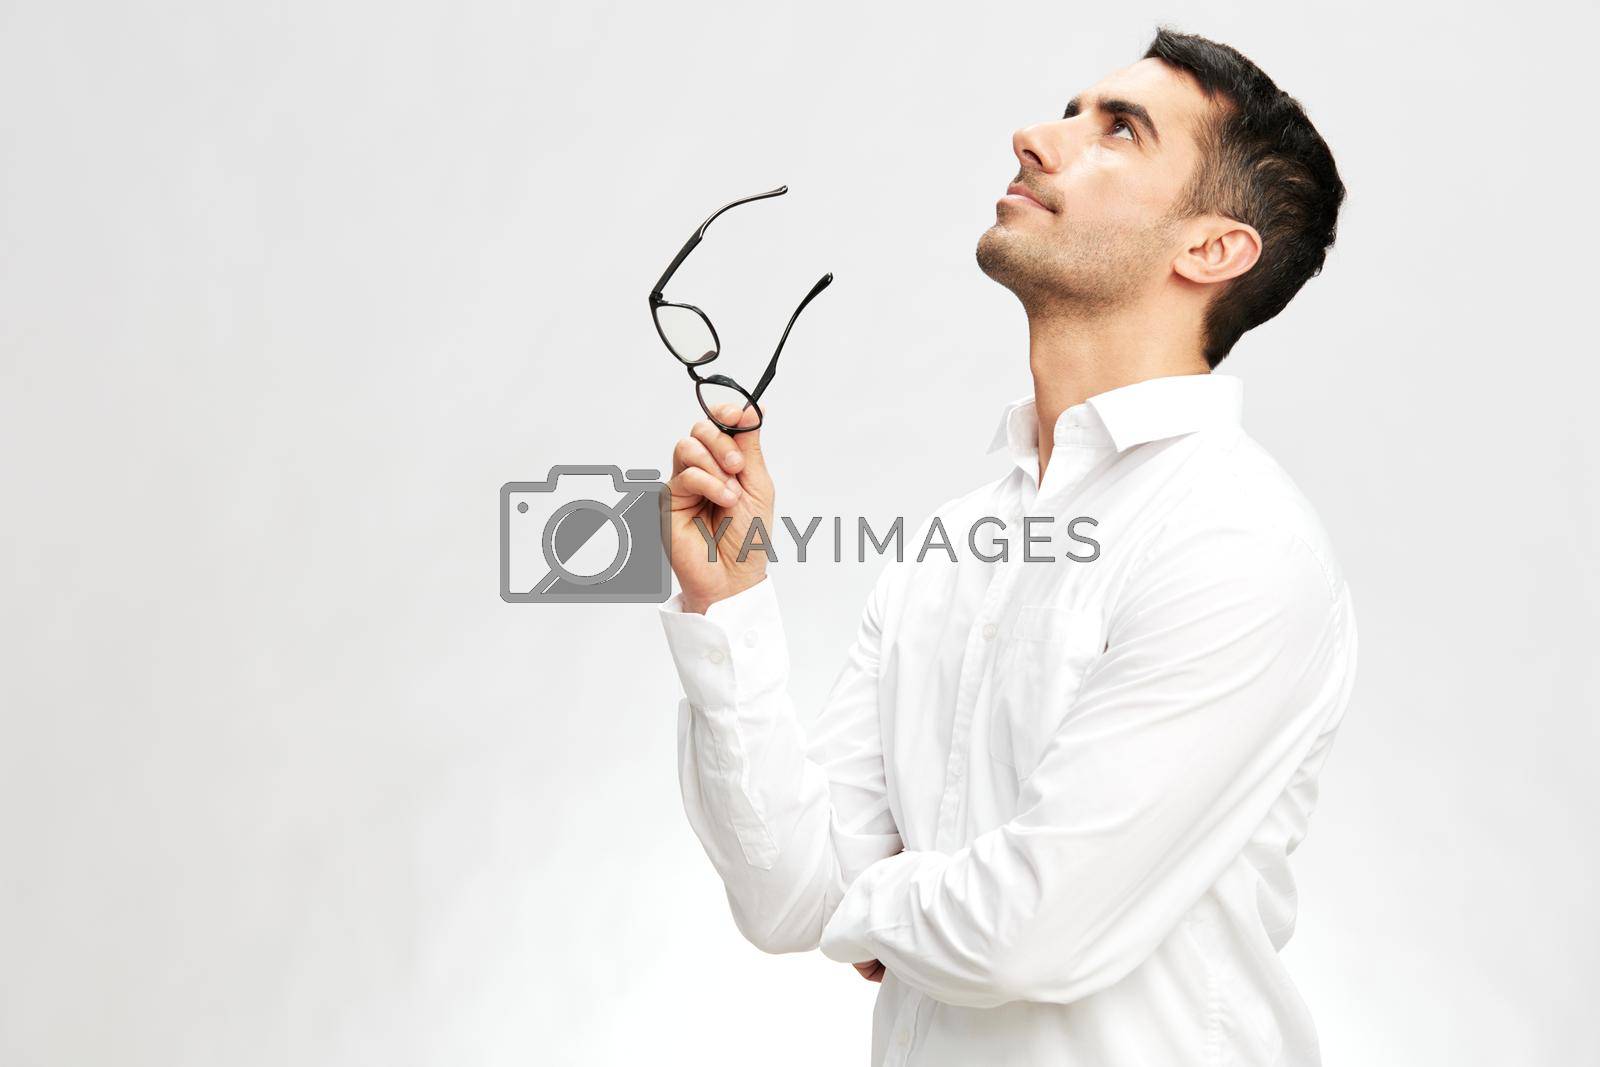 Royalty free image of handsome businessman white shirt posing hand gesture spectacled looking up by SHOTPRIME